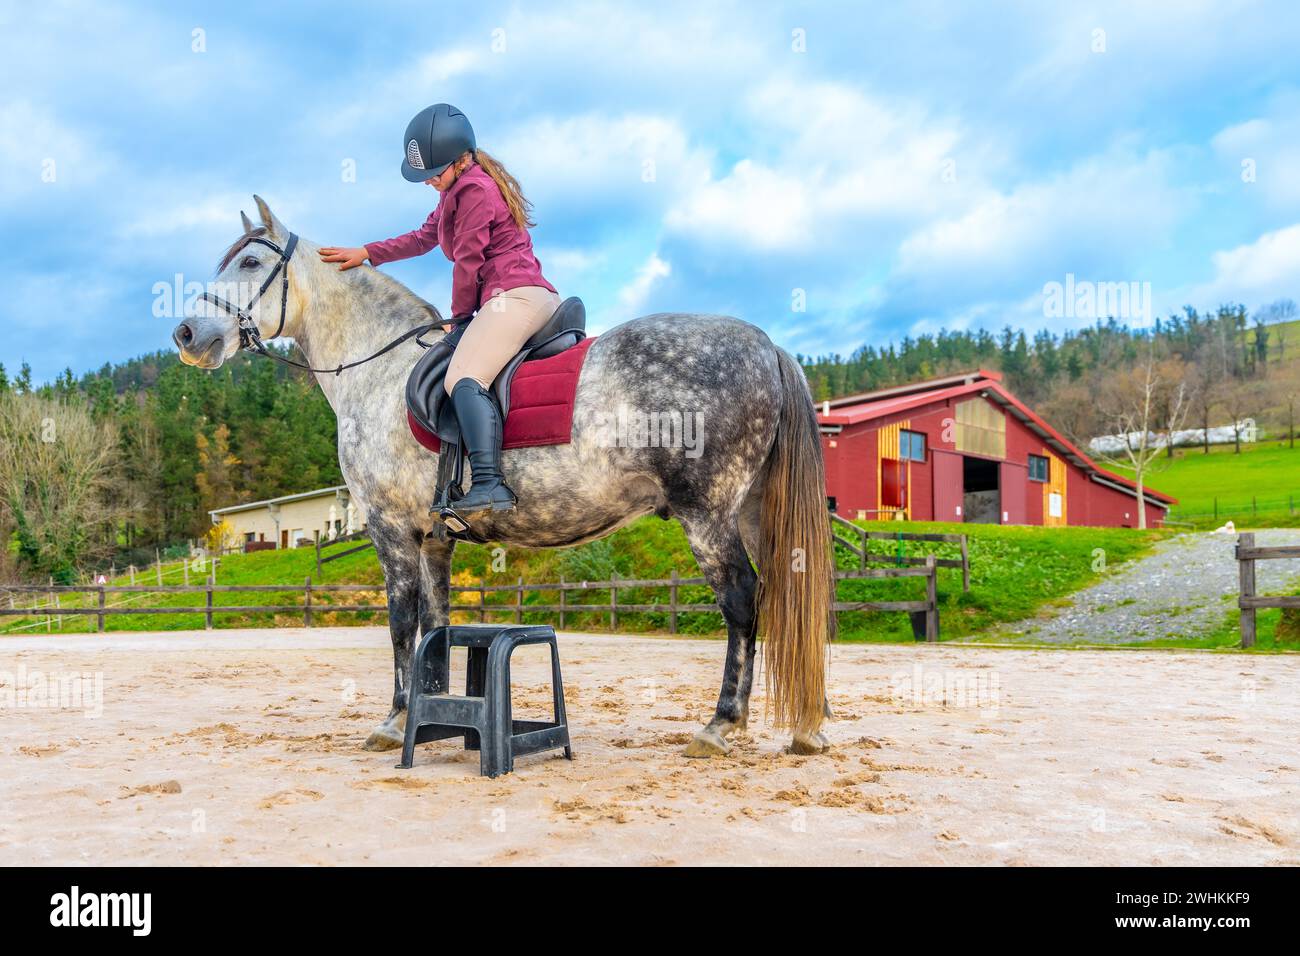 Girl with protective gear riding a horse in an equestrian center Stock Photo